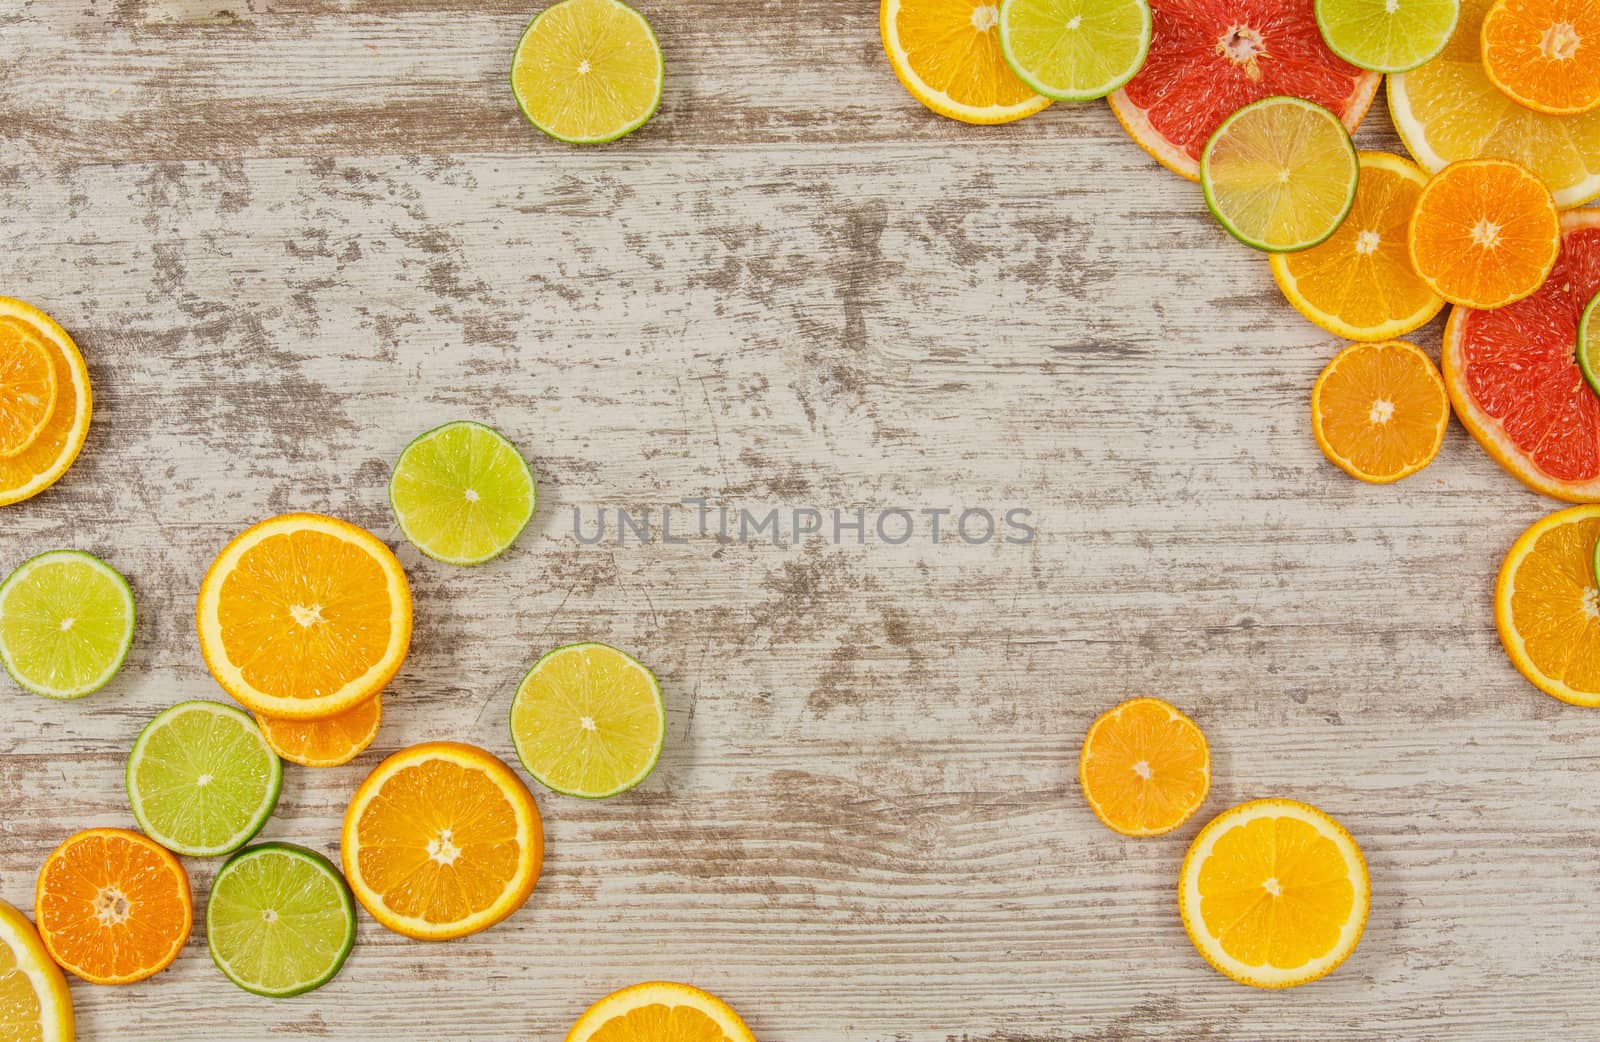 Citrus fruits background by gorov108